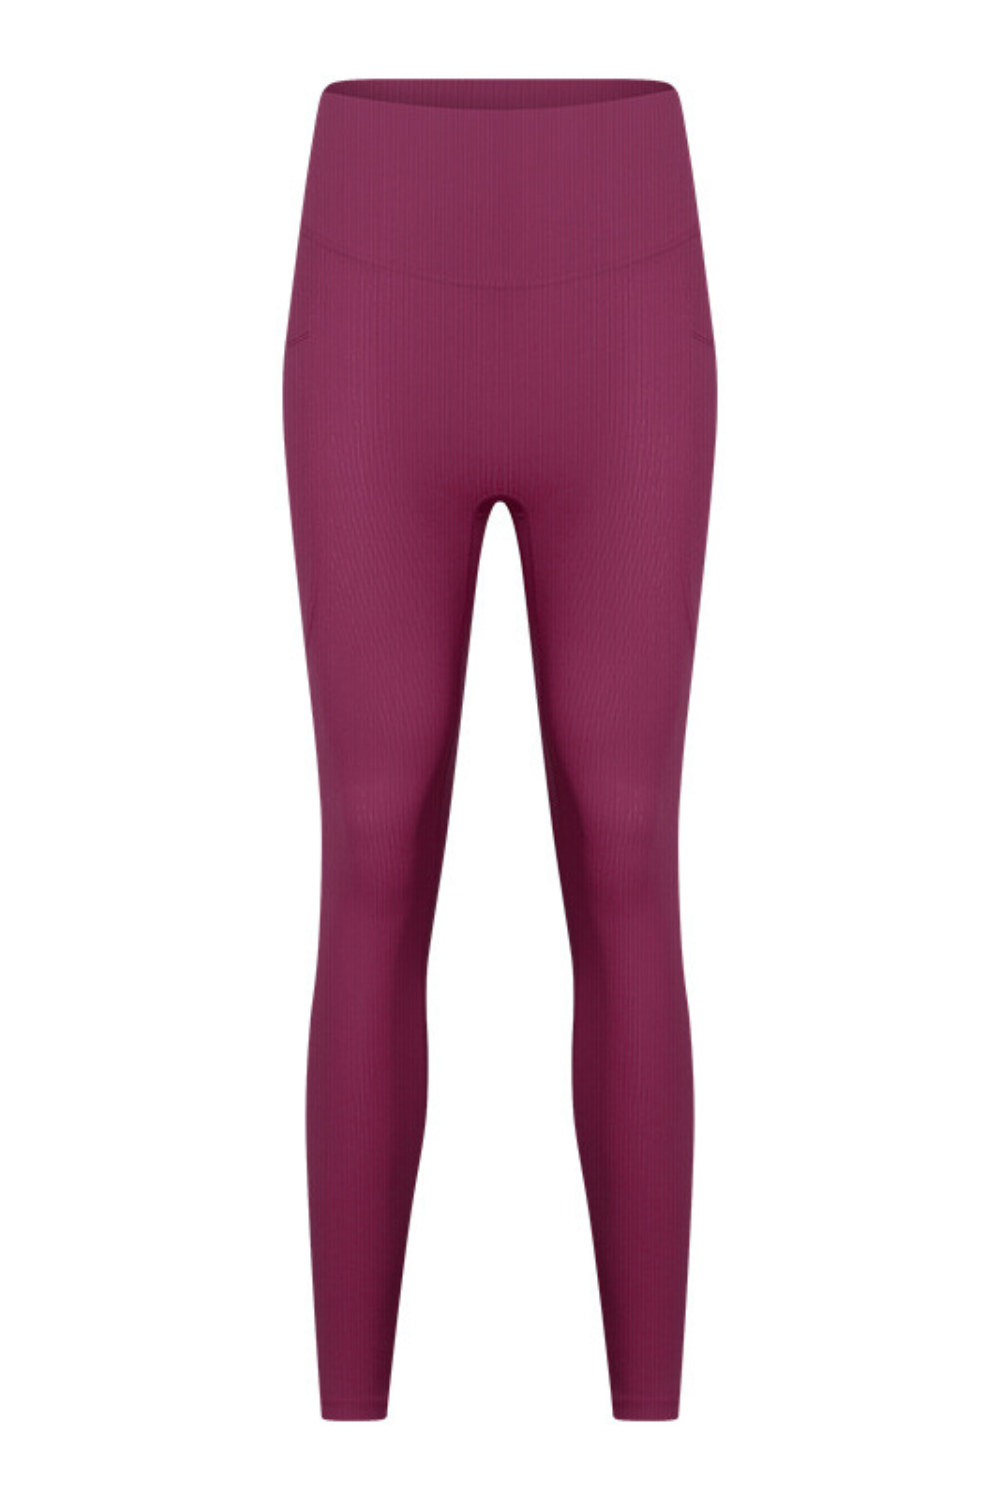 Wintersweet Berry Ribbed "Gianna" Soft and Supportive 7/8 Length Pocket Leggings